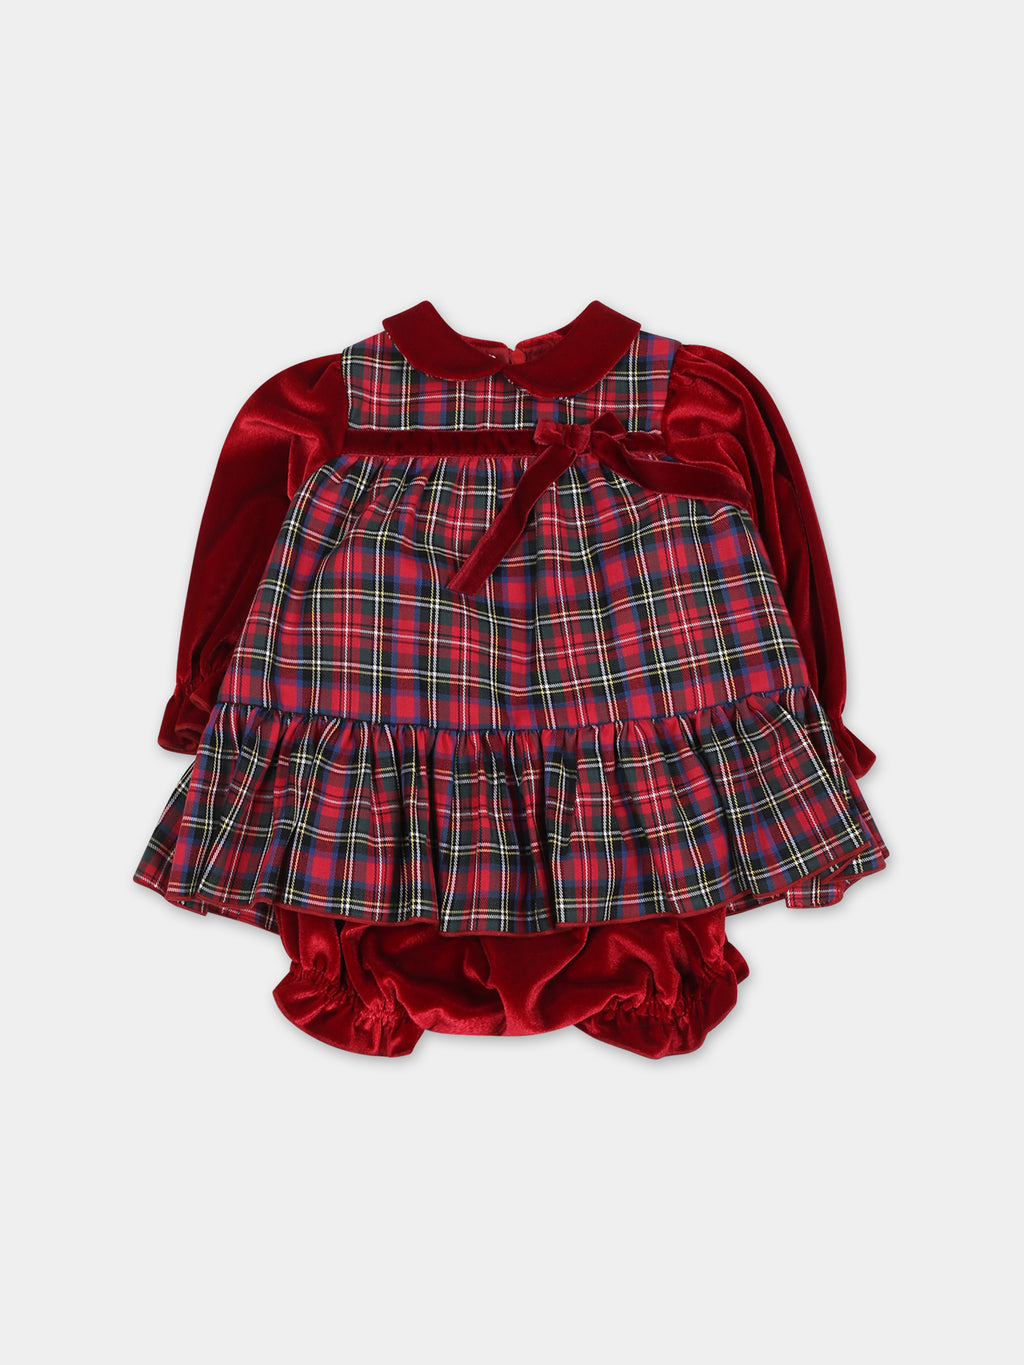 Red dress fro baby girl with bow